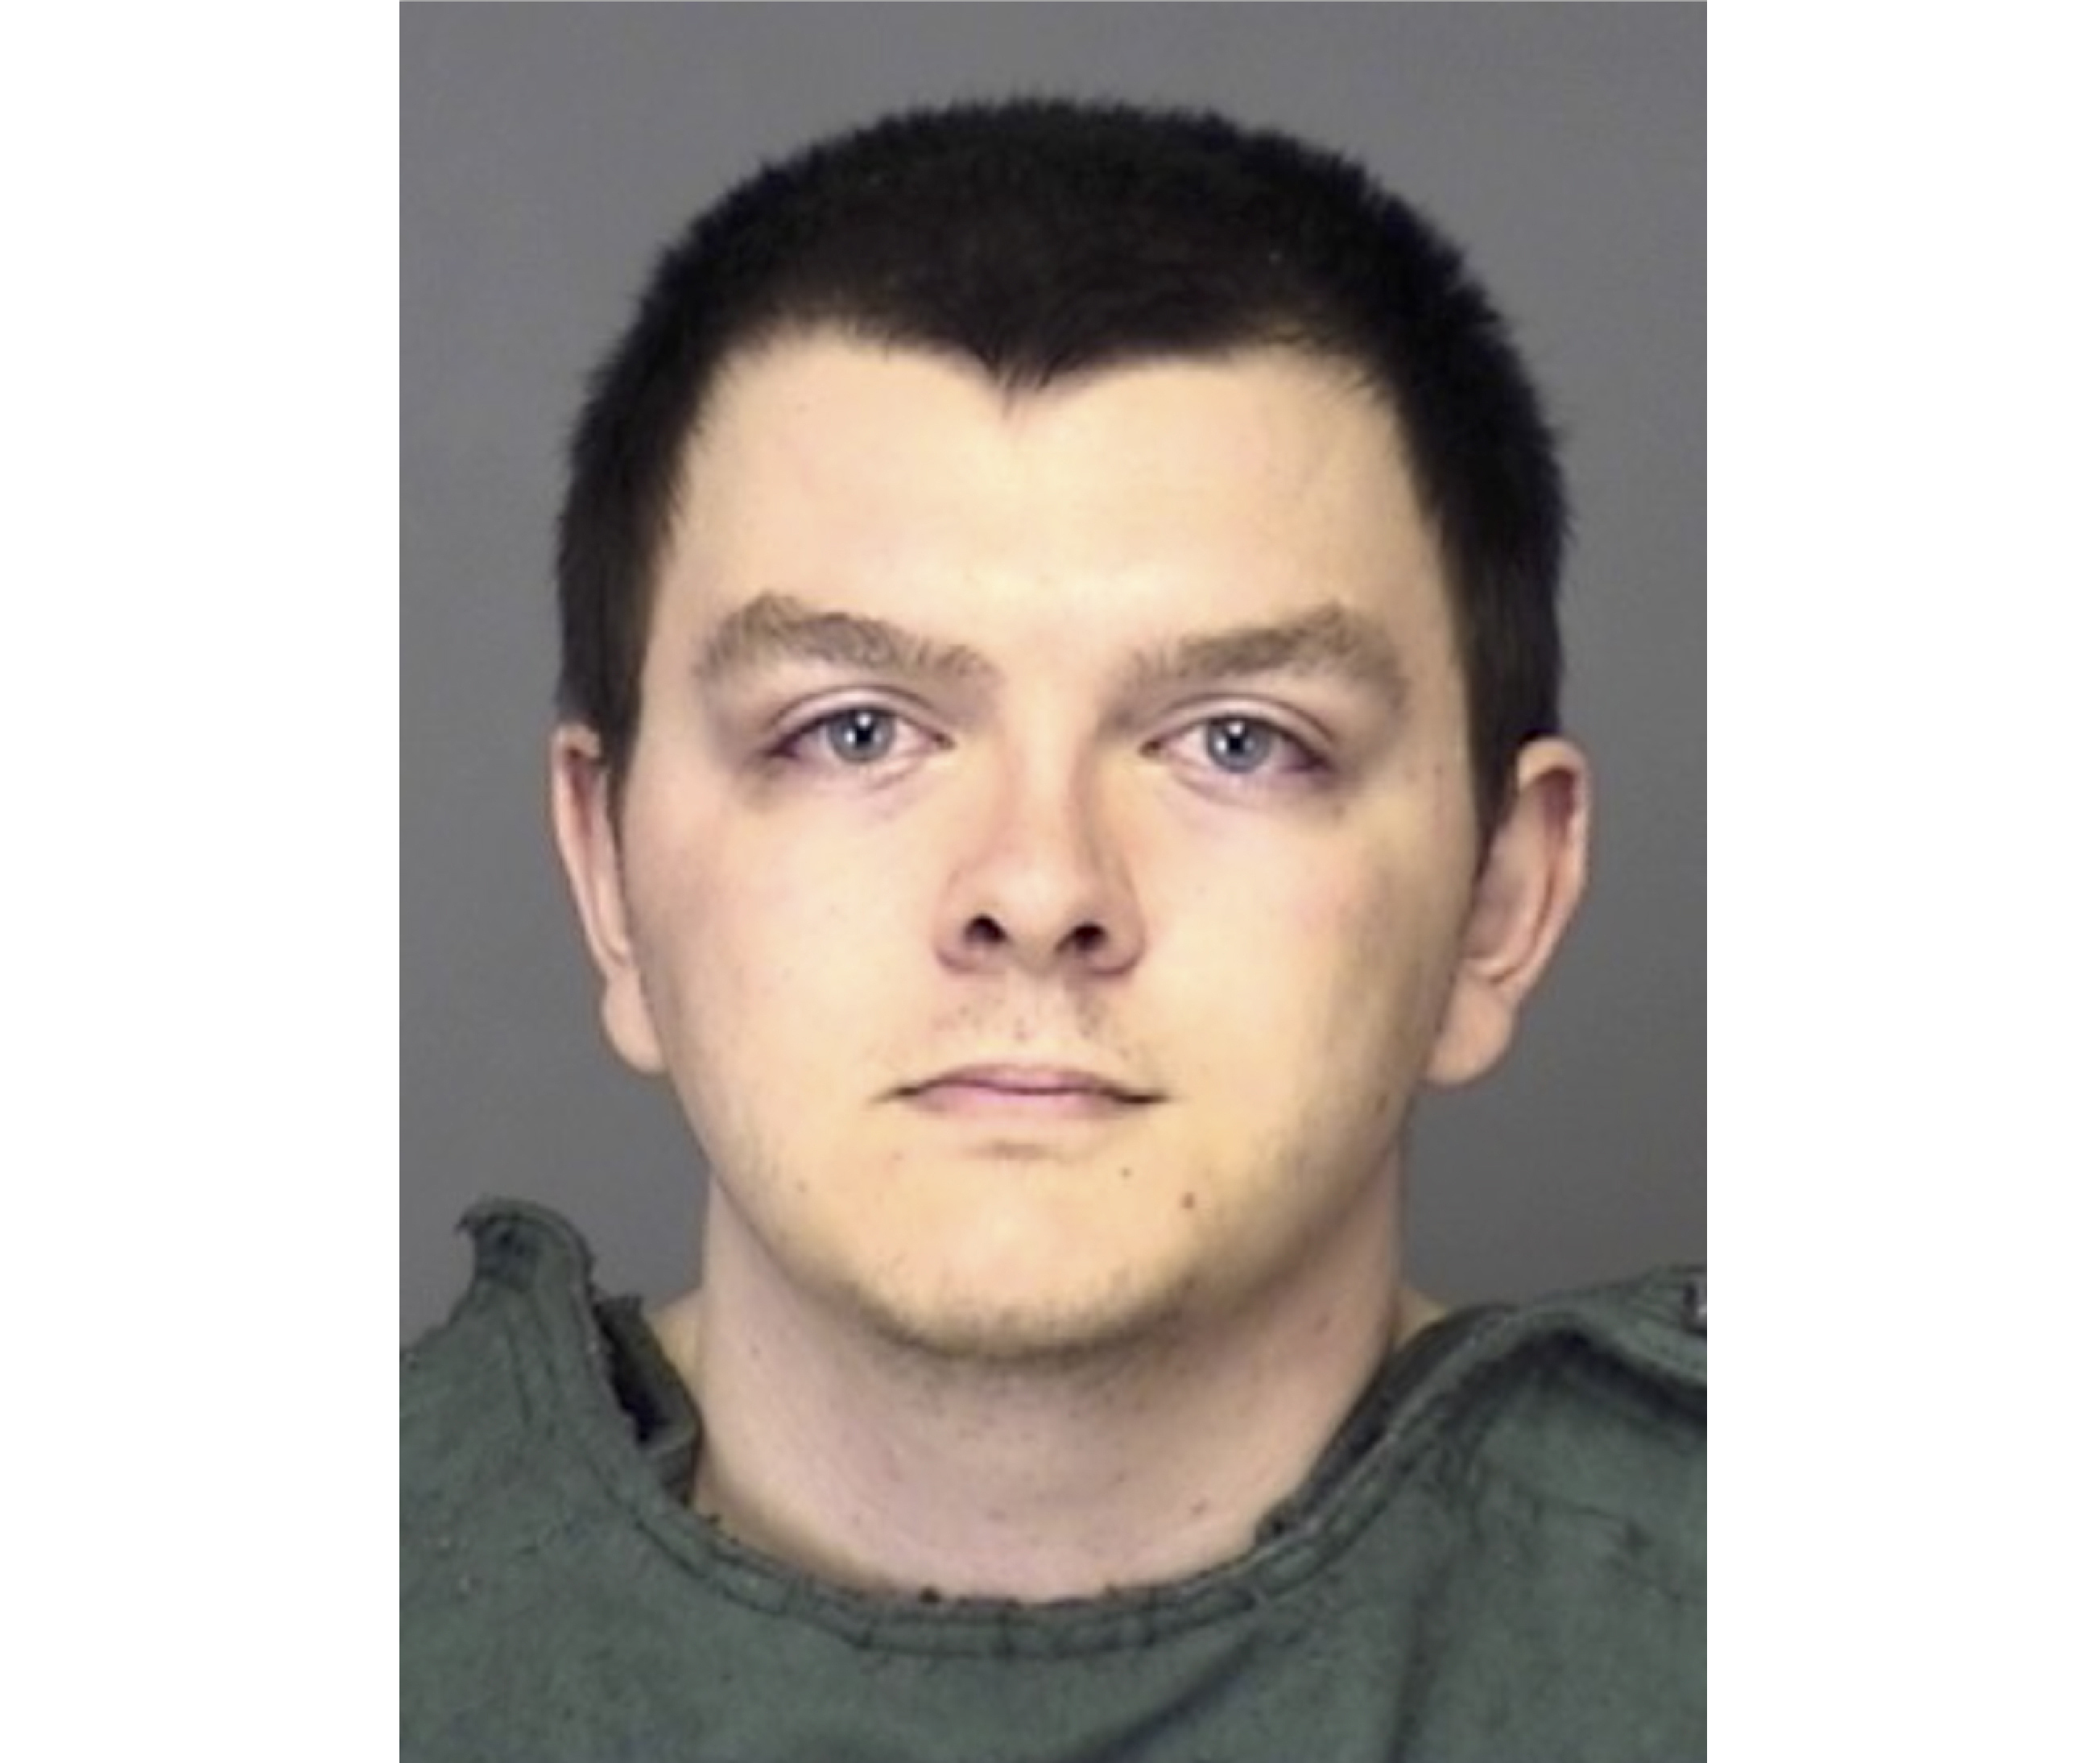 FILE - This Jan. 23, 2019, booking photo released by the Highlands County Sheriff's Office shows Zephen Xaver. Jury selection starts Monday in the penalty trial of 27-year-old Xaver, who pleaded guilty last year to murder. (Highlands County Sheriff's Office via AP, File)